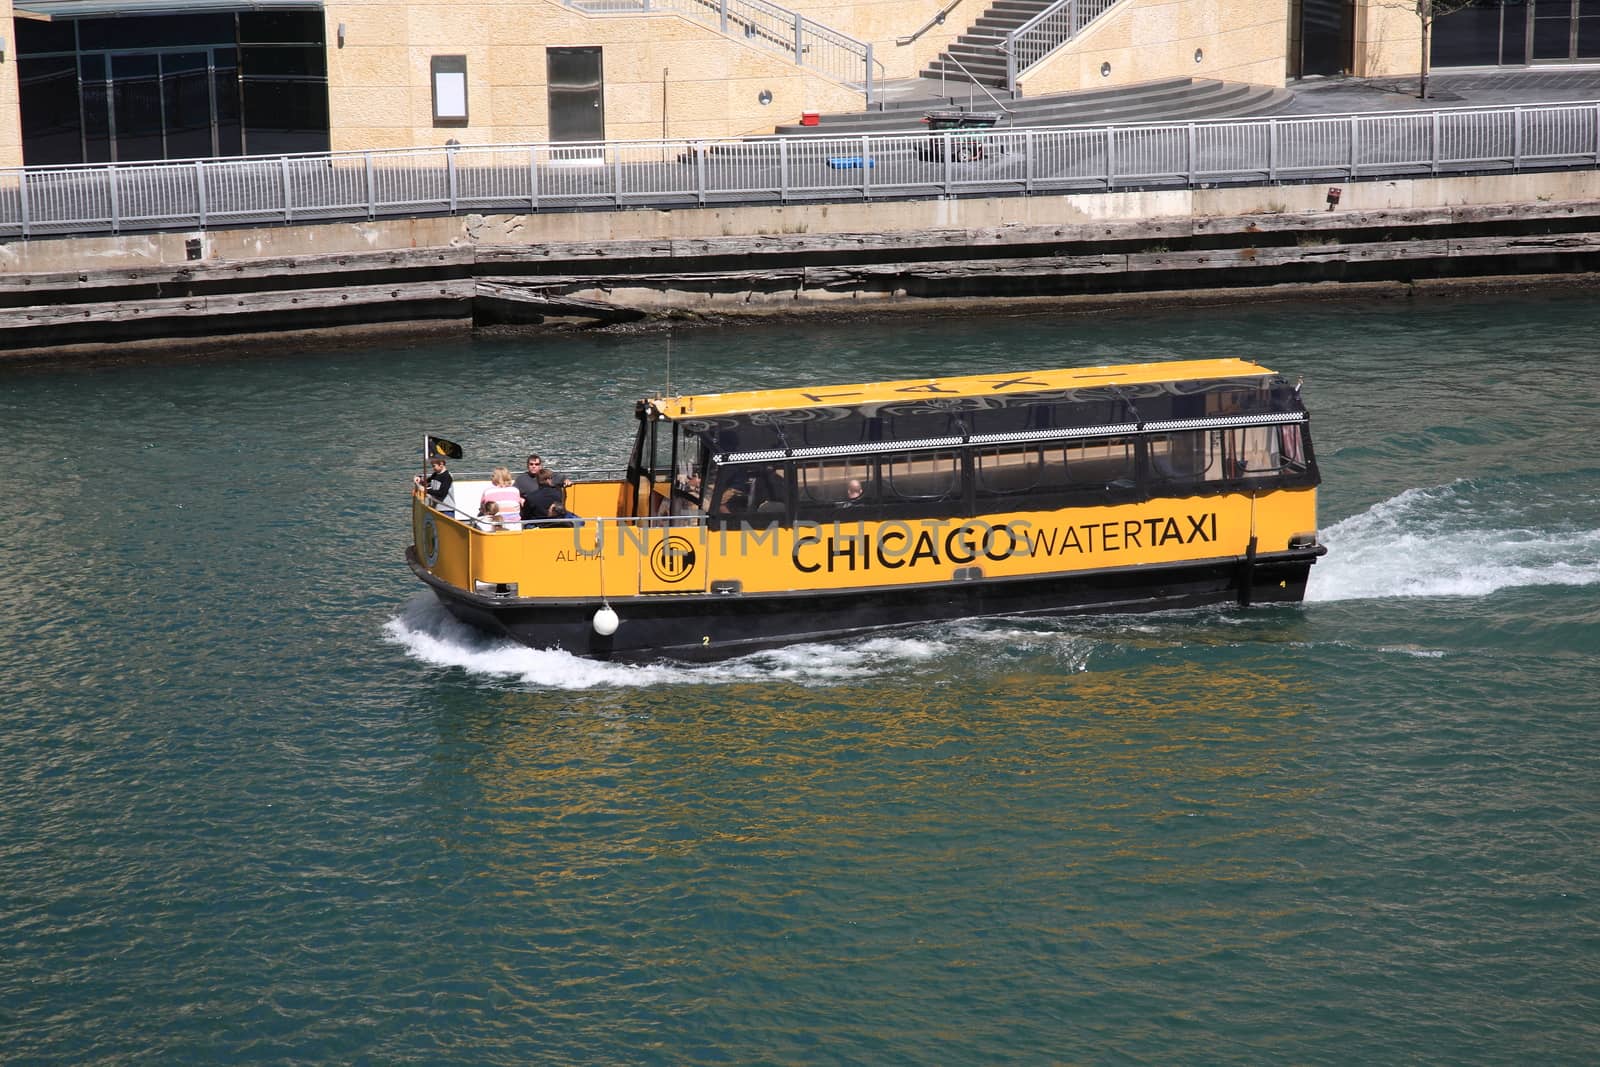 Tourists tour the skyscrapers of Chicago as they ride the Chicago River in a water taxi.